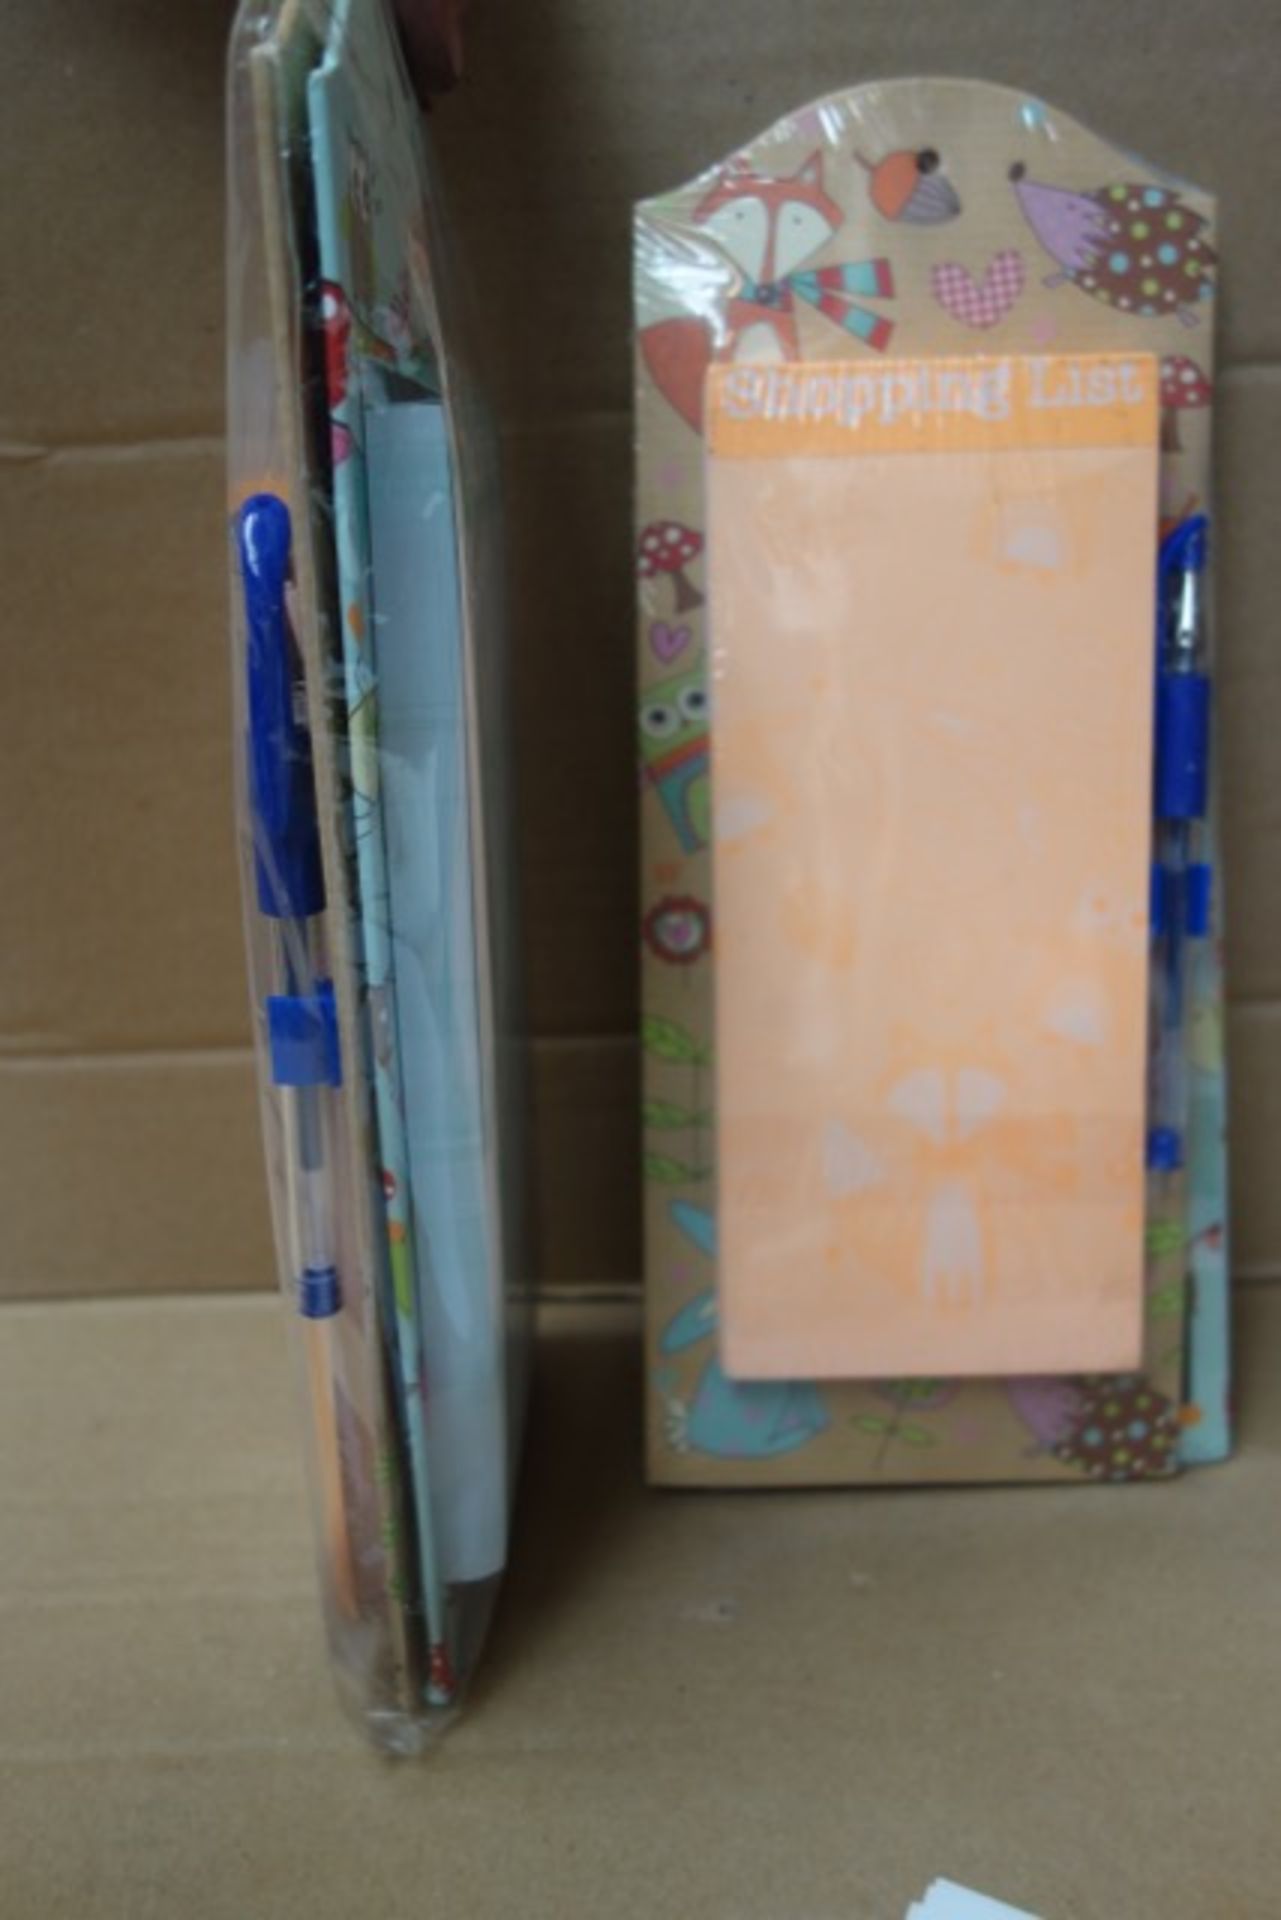 72 x Sets of 2 Owls/Woodland Magnetic Shopping List/Memo Pads. Complete with gel pens. RRP £9.99 - Image 2 of 2